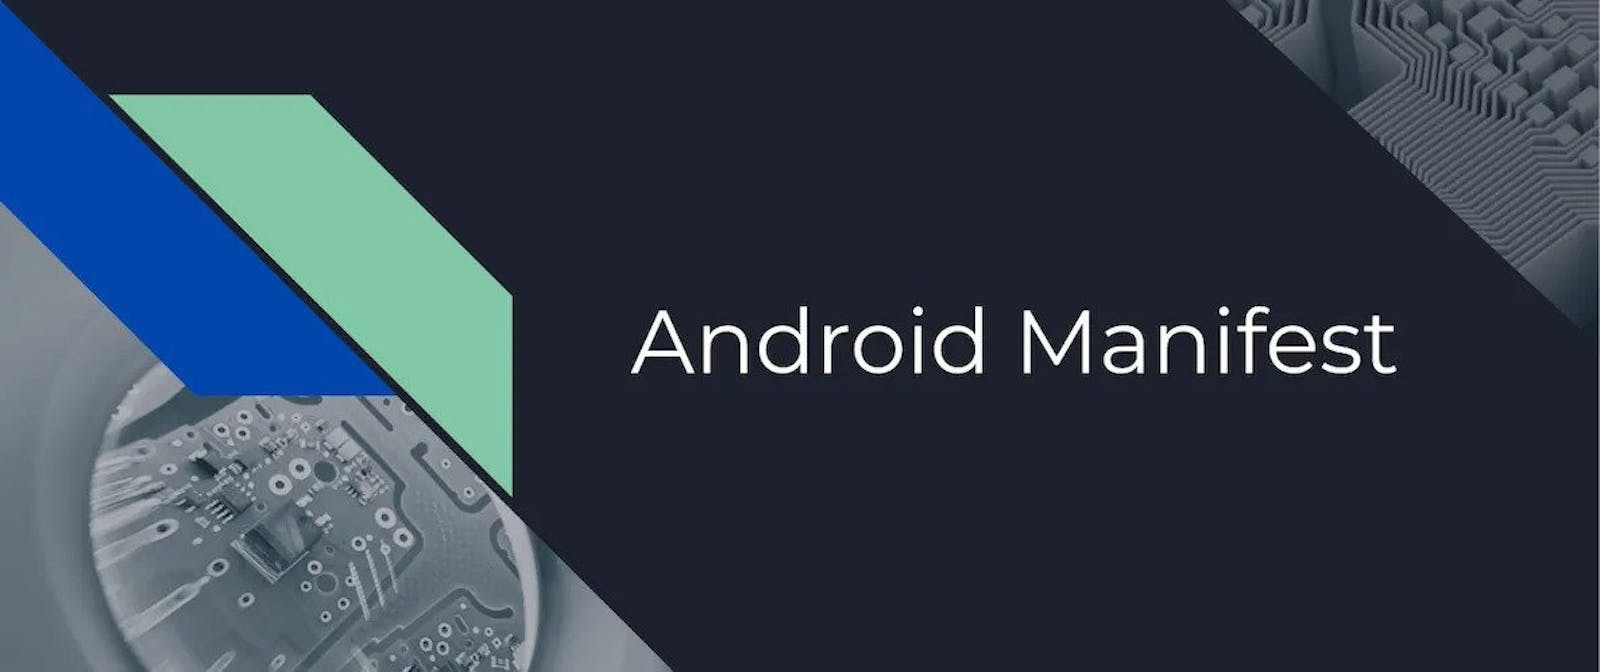 AndroidManifest.xml : Overview